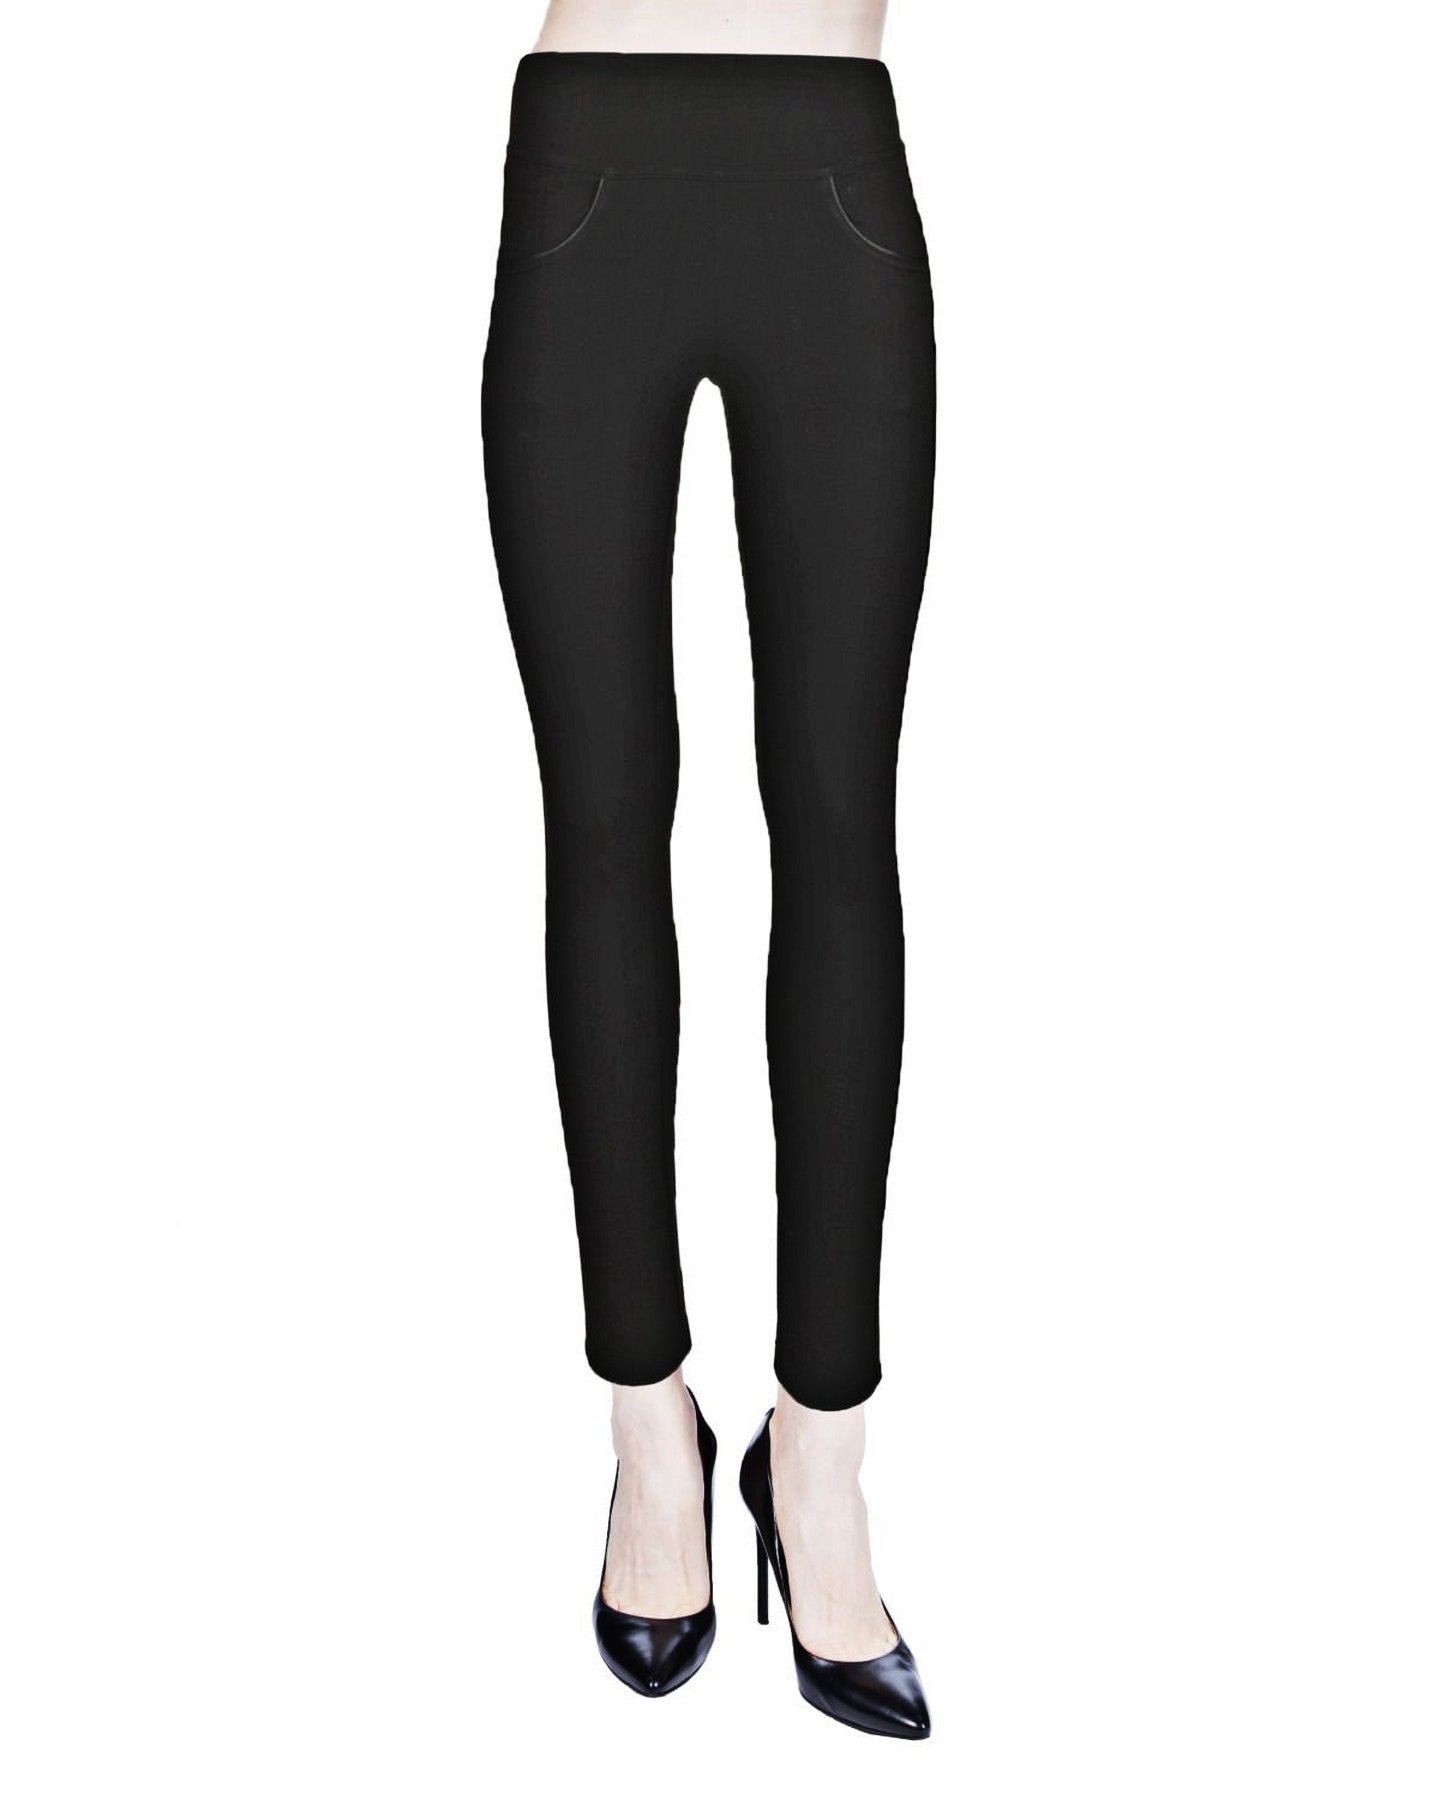 FASHION BOOMY Women's High Waisted Leggings - Full Length Tights - Regular  and Plus Sizes Small Black at  Women's Clothing store